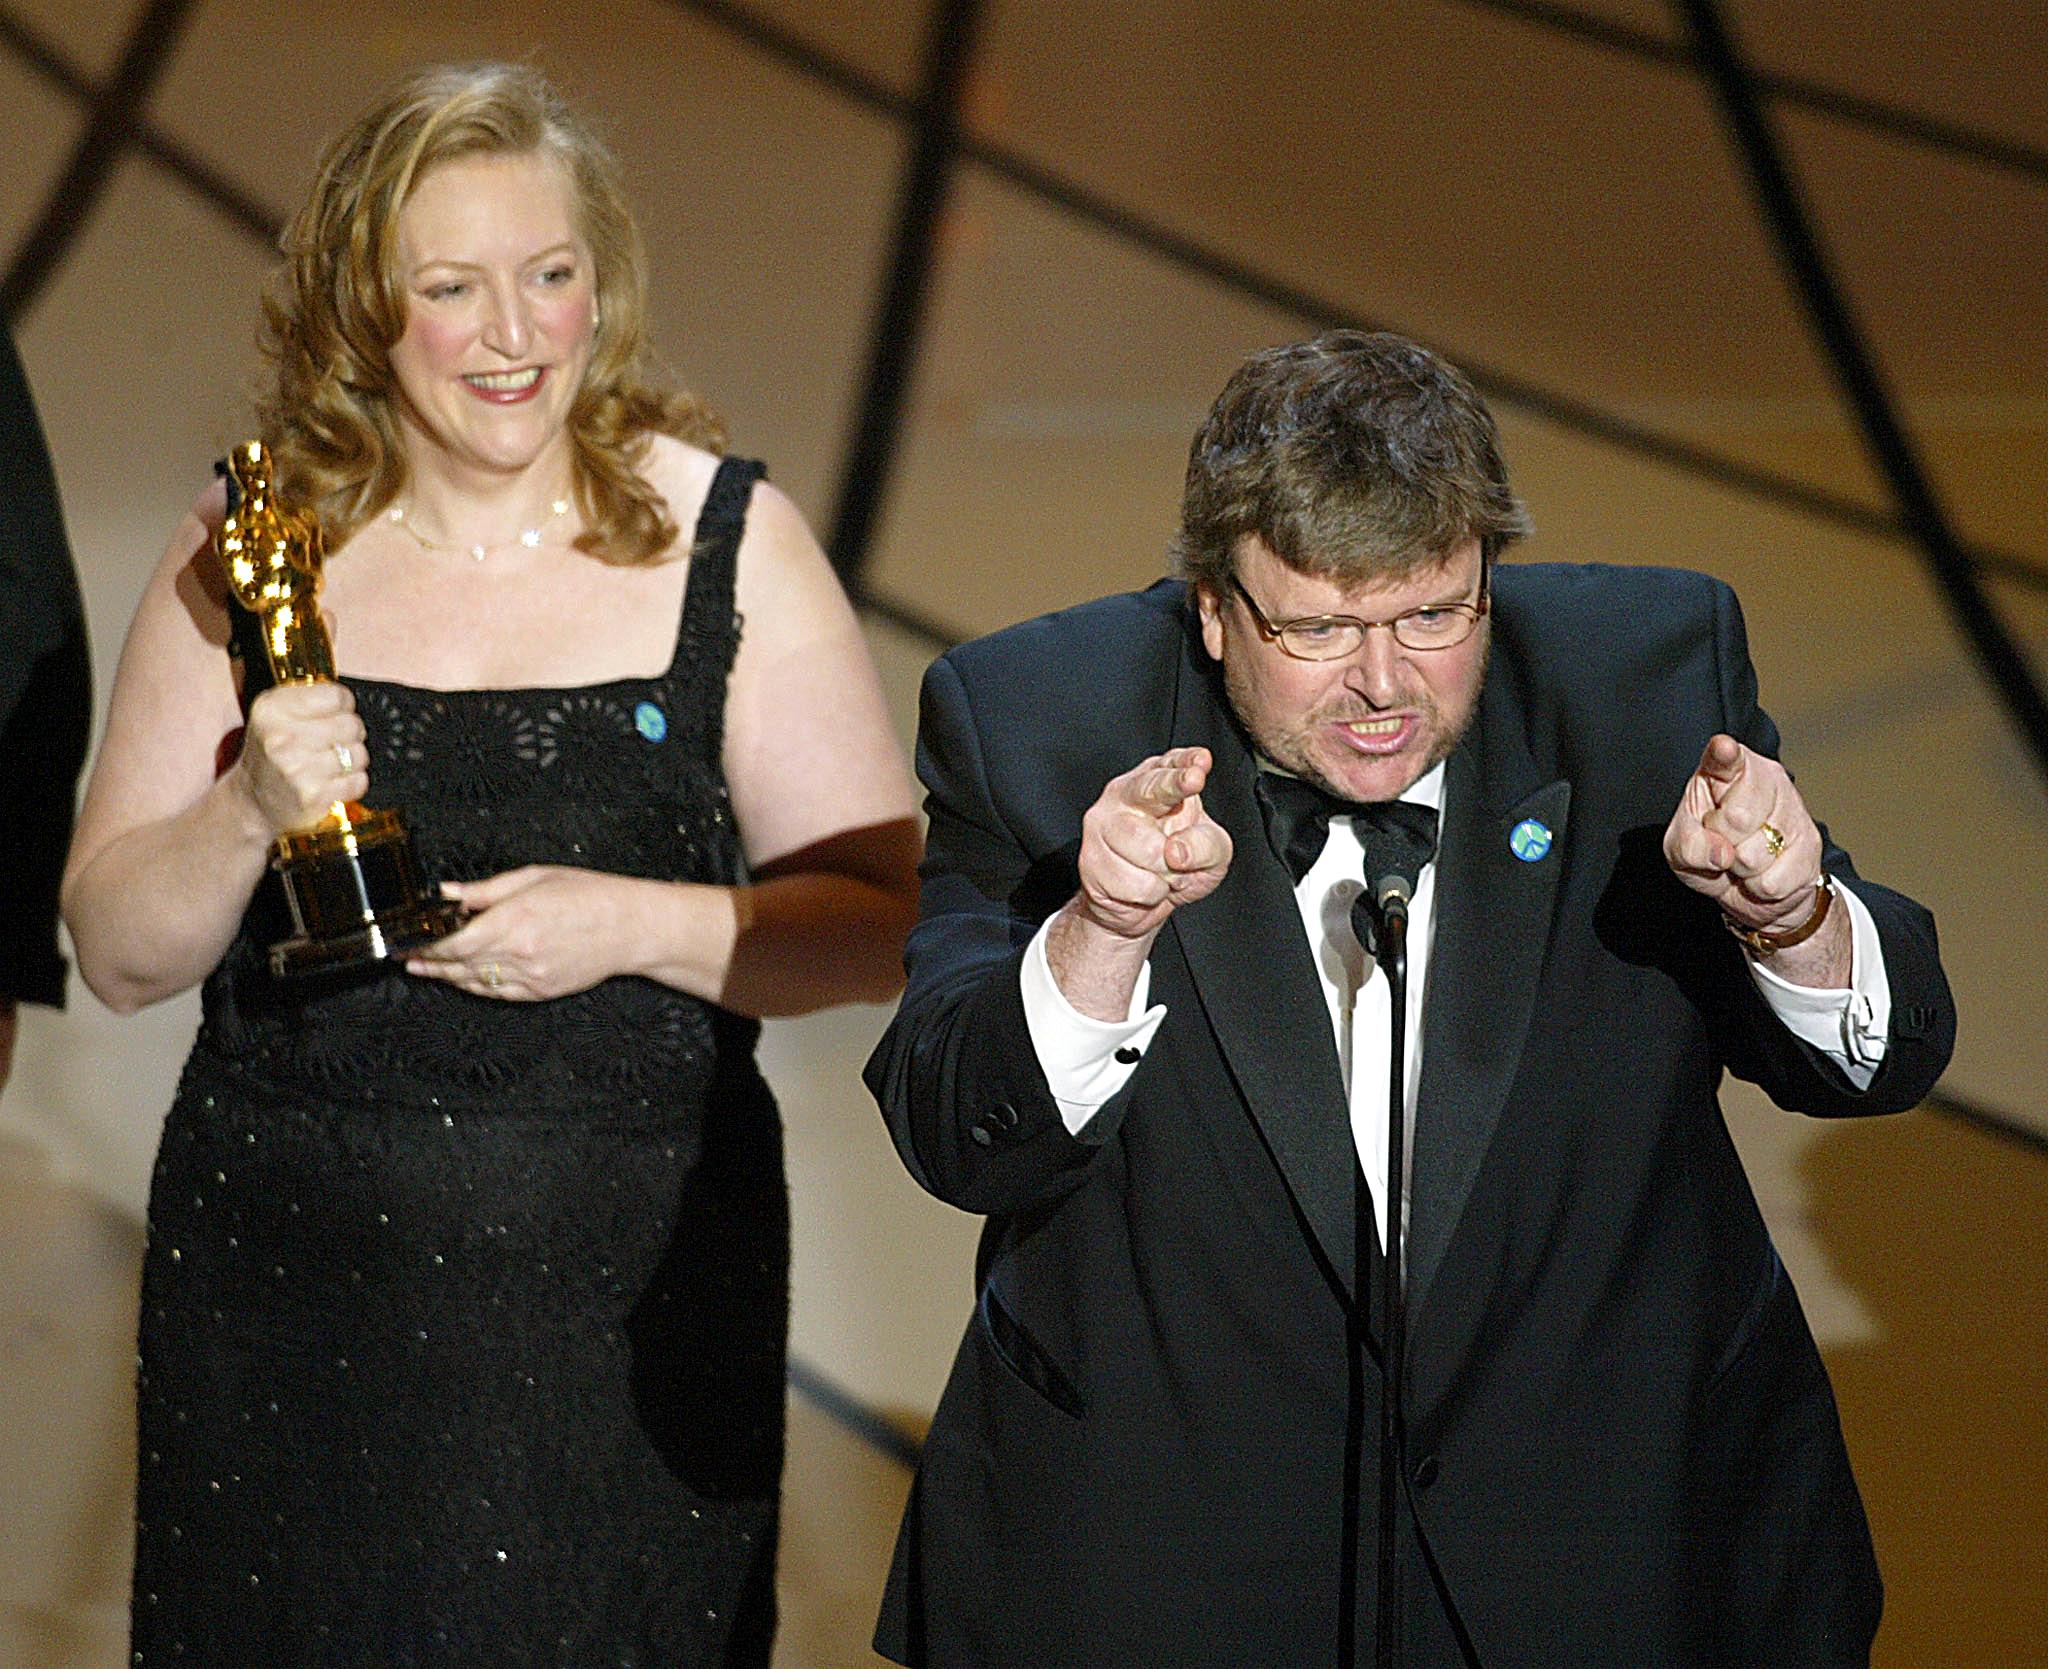 PHOTO: Filmmaker Michael Moore spoke out against President George W. Bush and the war in Iraq while accepting his Oscar for "Bowling for Columbine" during the 75th Academy Awards in Hollywood, Calif., March 23, 2003.